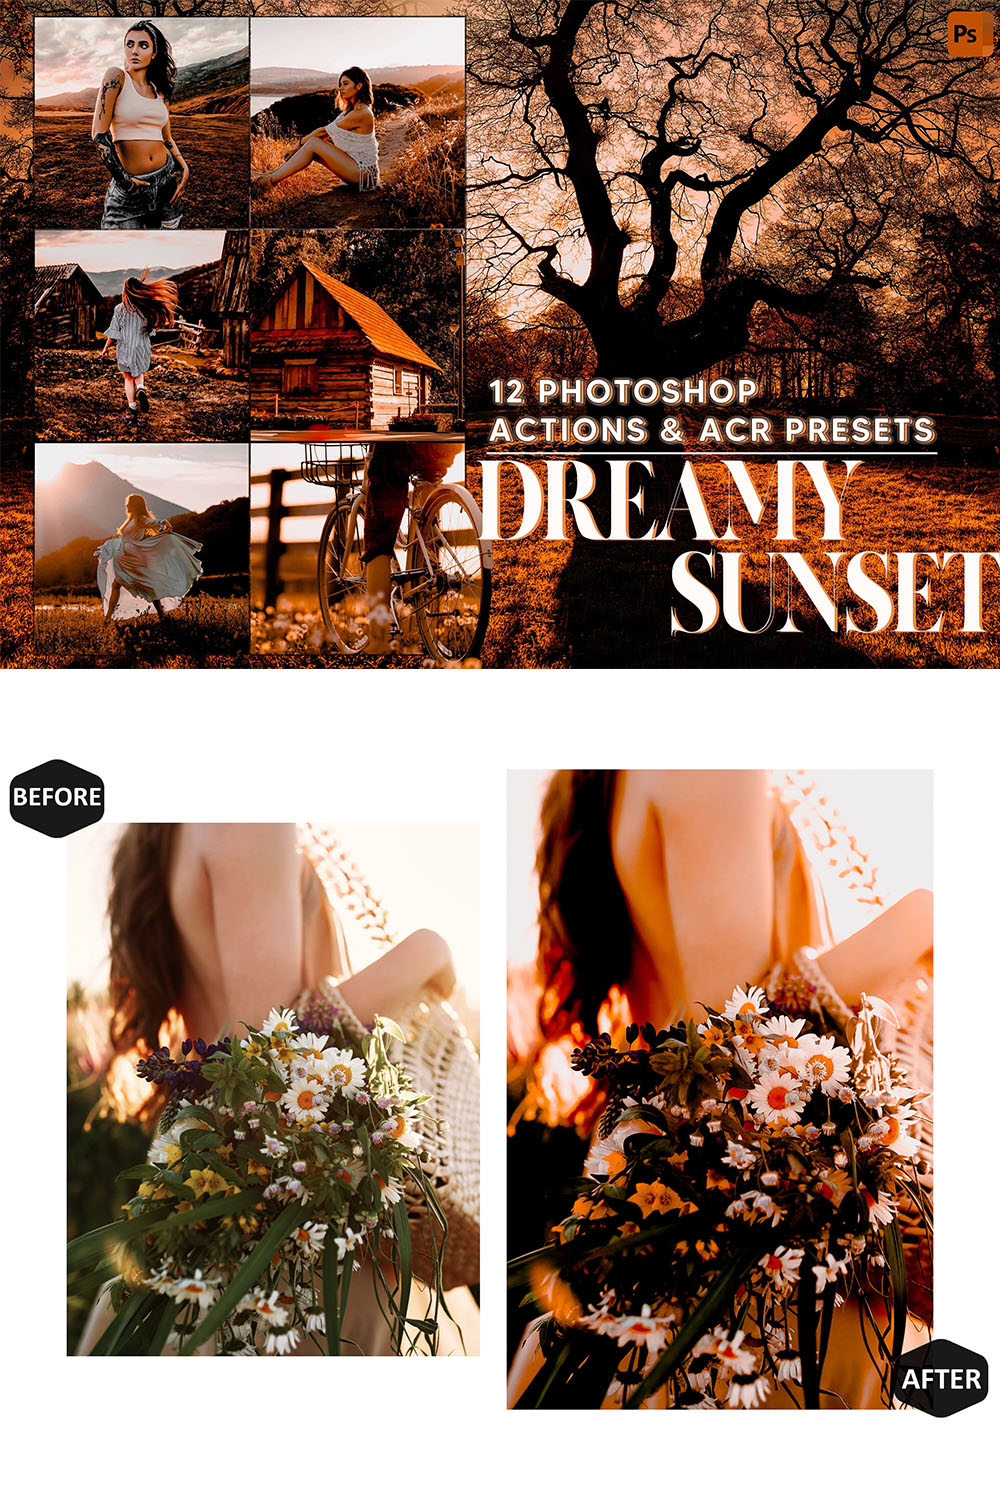 12 Photoshop Actions, Dreamy Sunset Ps Action, Golden ACR Preset, Moody Ps Filter, Atn Portrait And Lifestyle Theme Instagram, Blogger pinterest preview image.